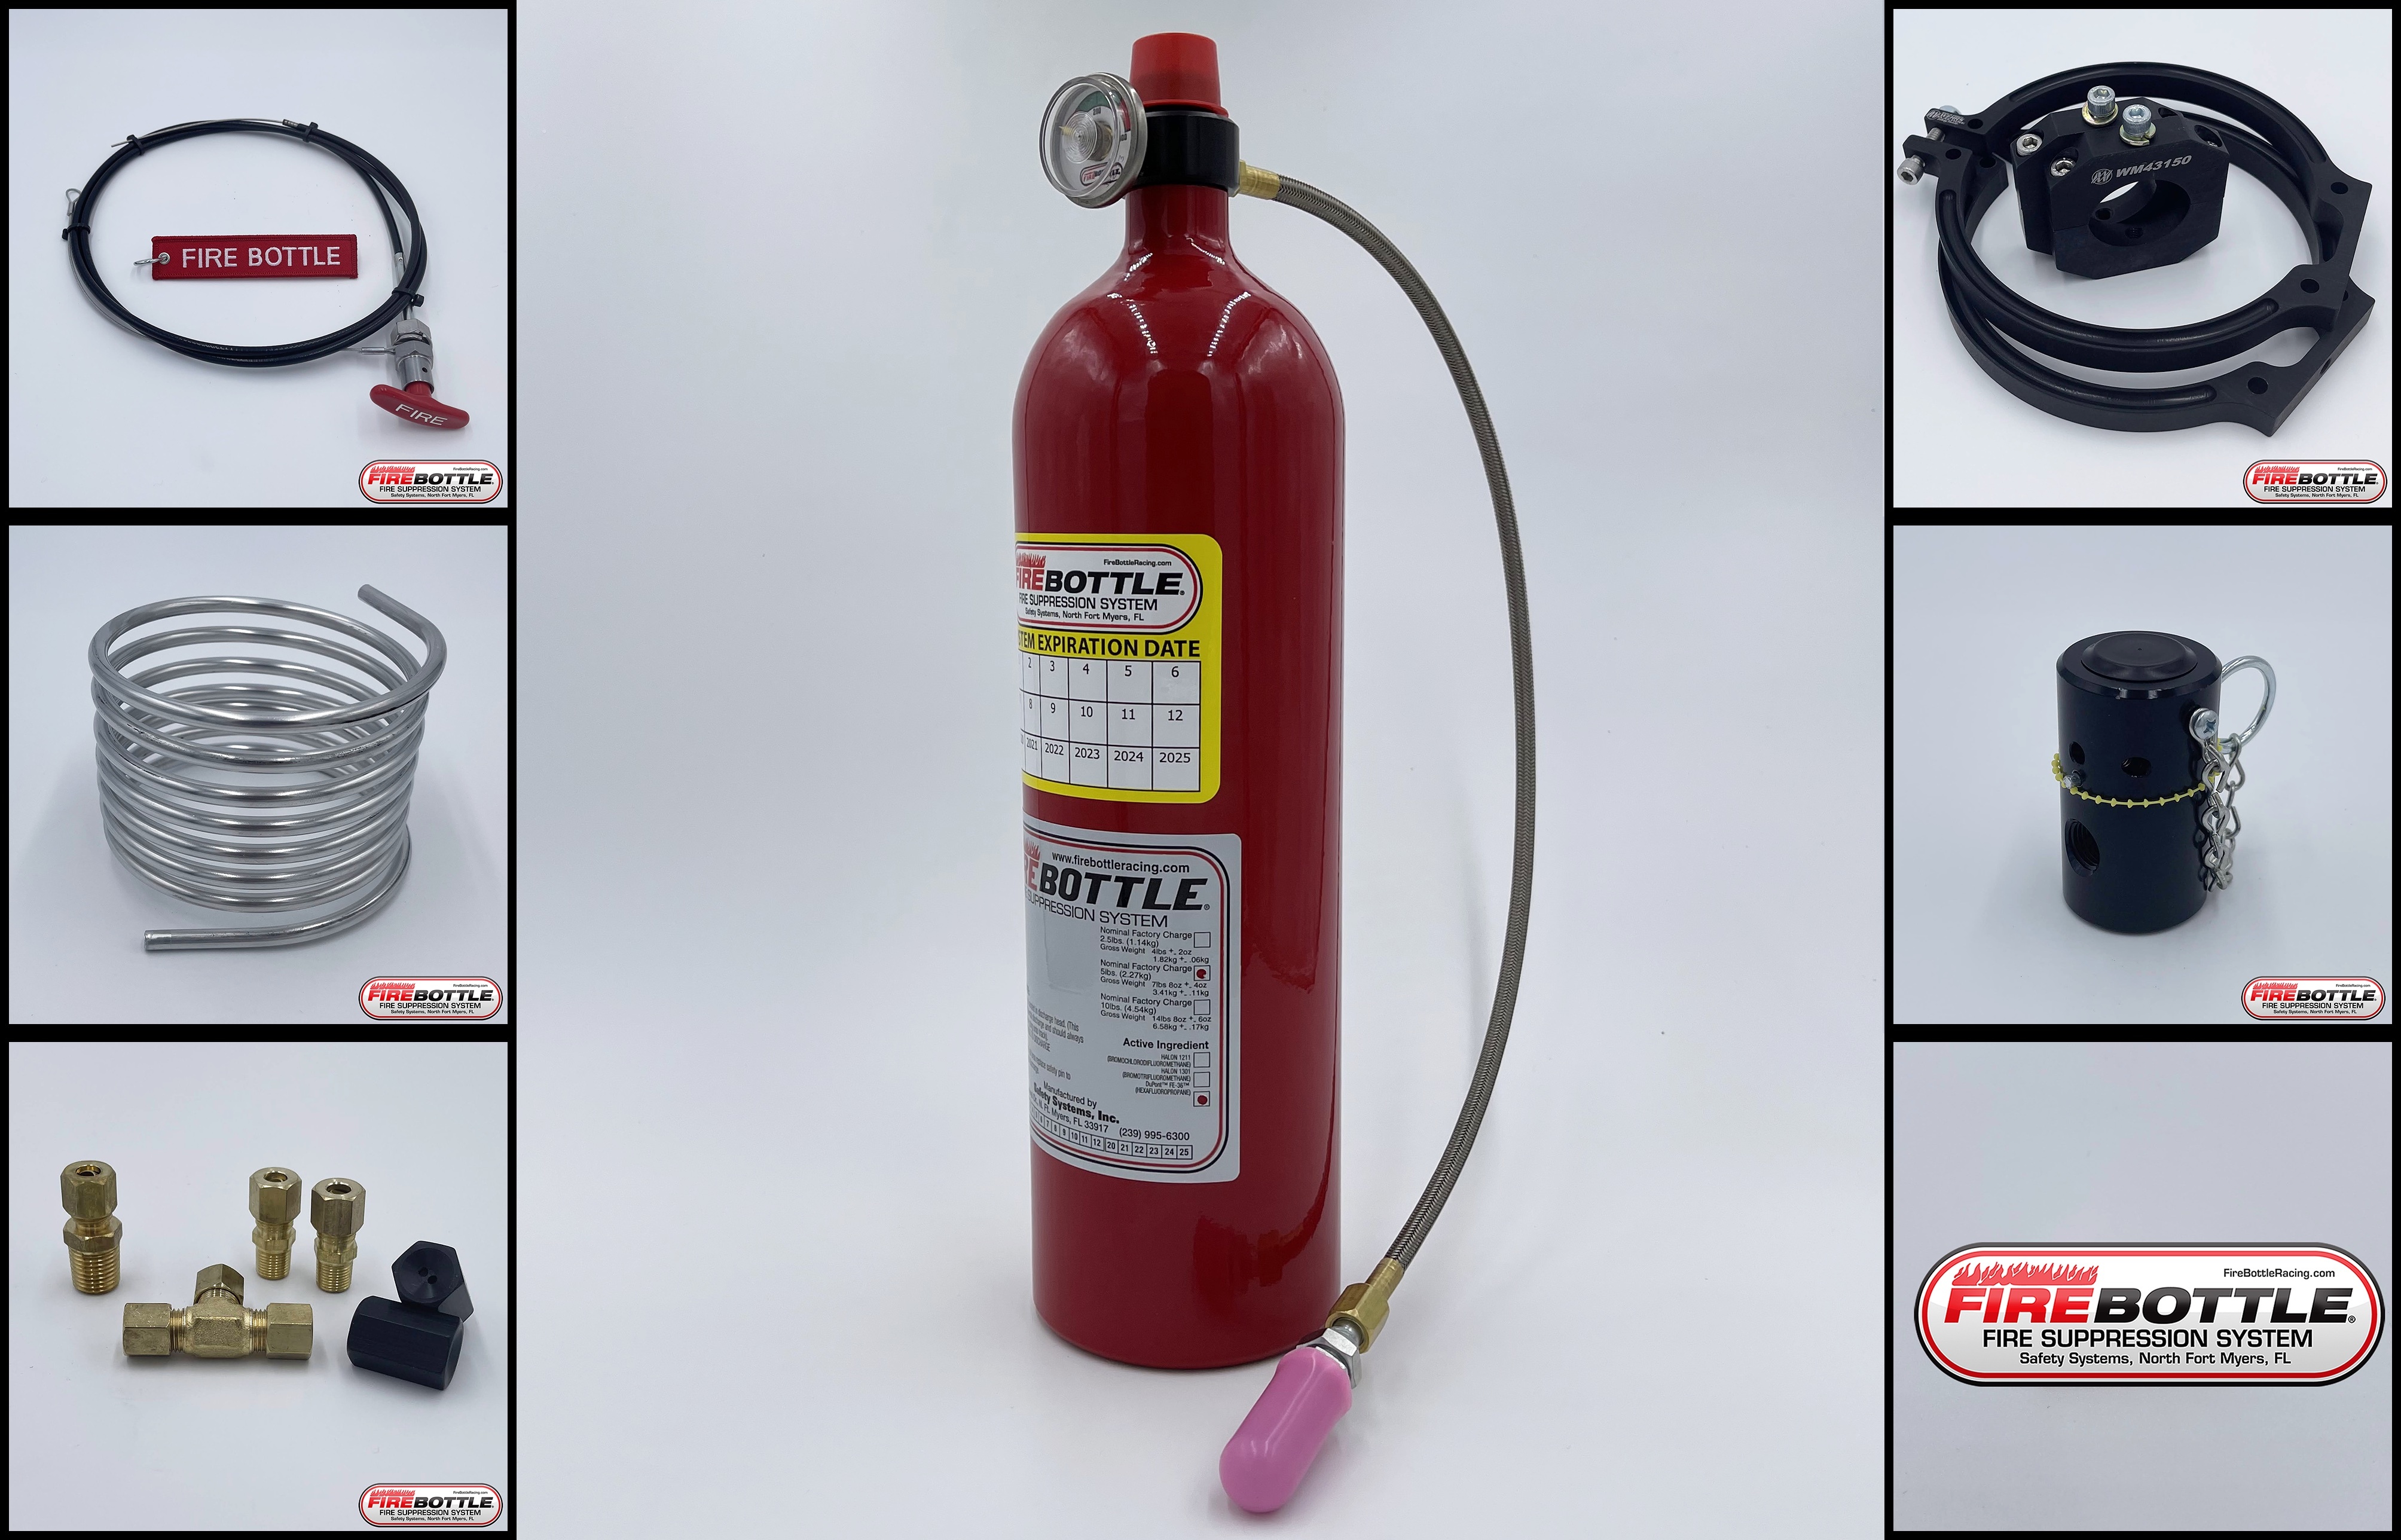 Safety Systems AMSC-500H Fire Suppression System, Automatic / Manual, SFI 17.3, 5.0 lb Bottle, Fittings / Hose / Manual Head / Mount / Pull Cable, Kit